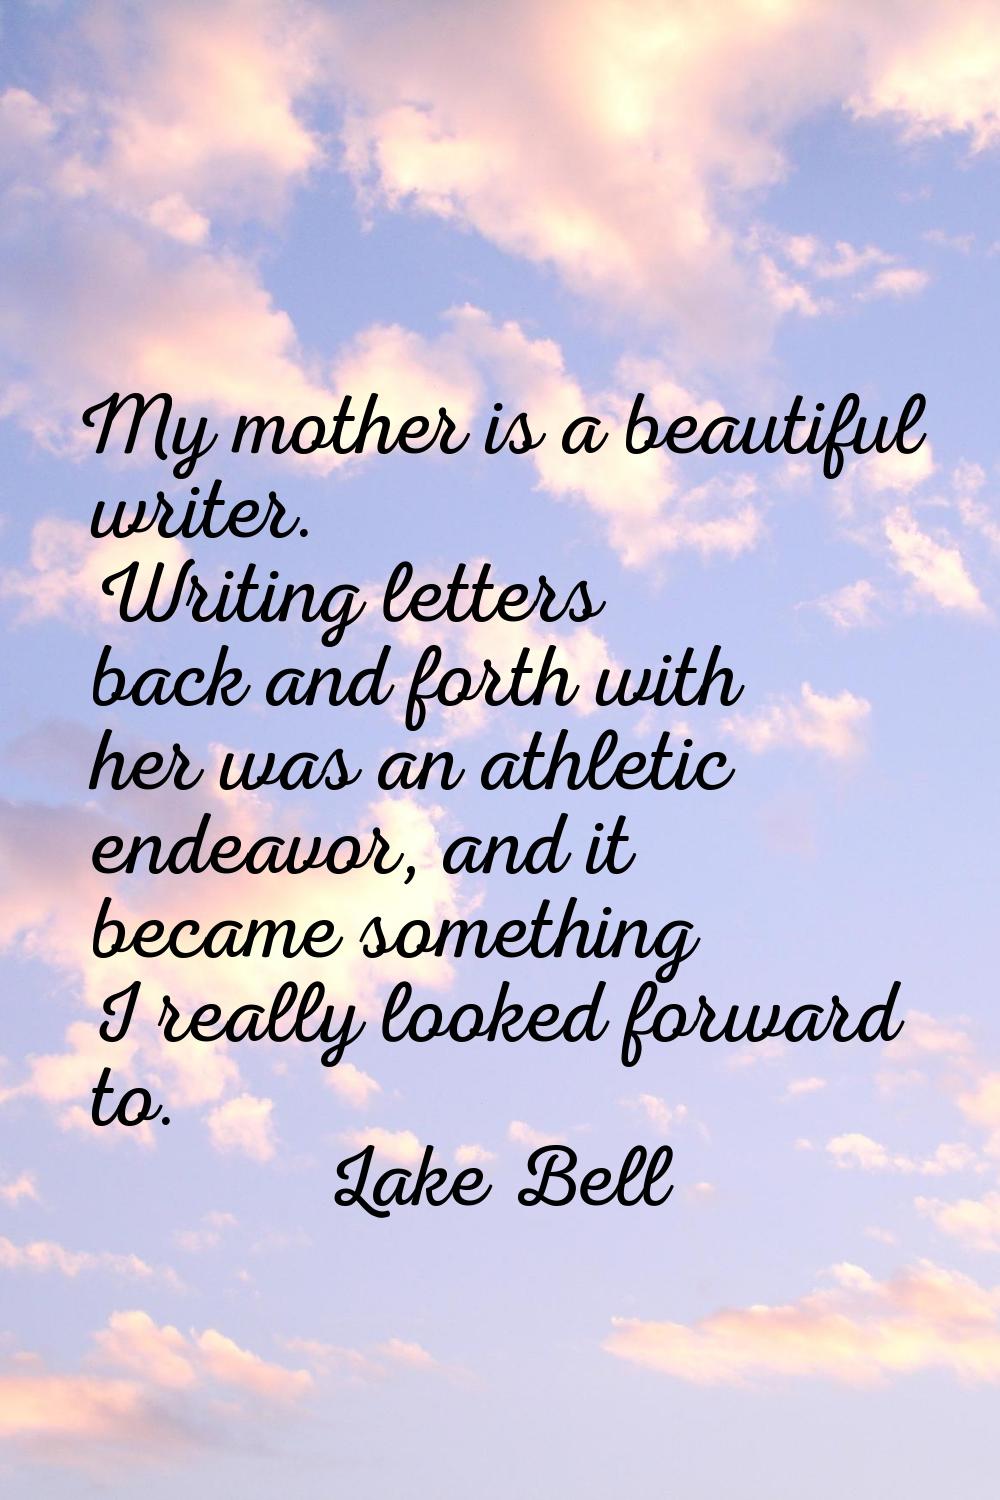 My mother is a beautiful writer. Writing letters back and forth with her was an athletic endeavor, 